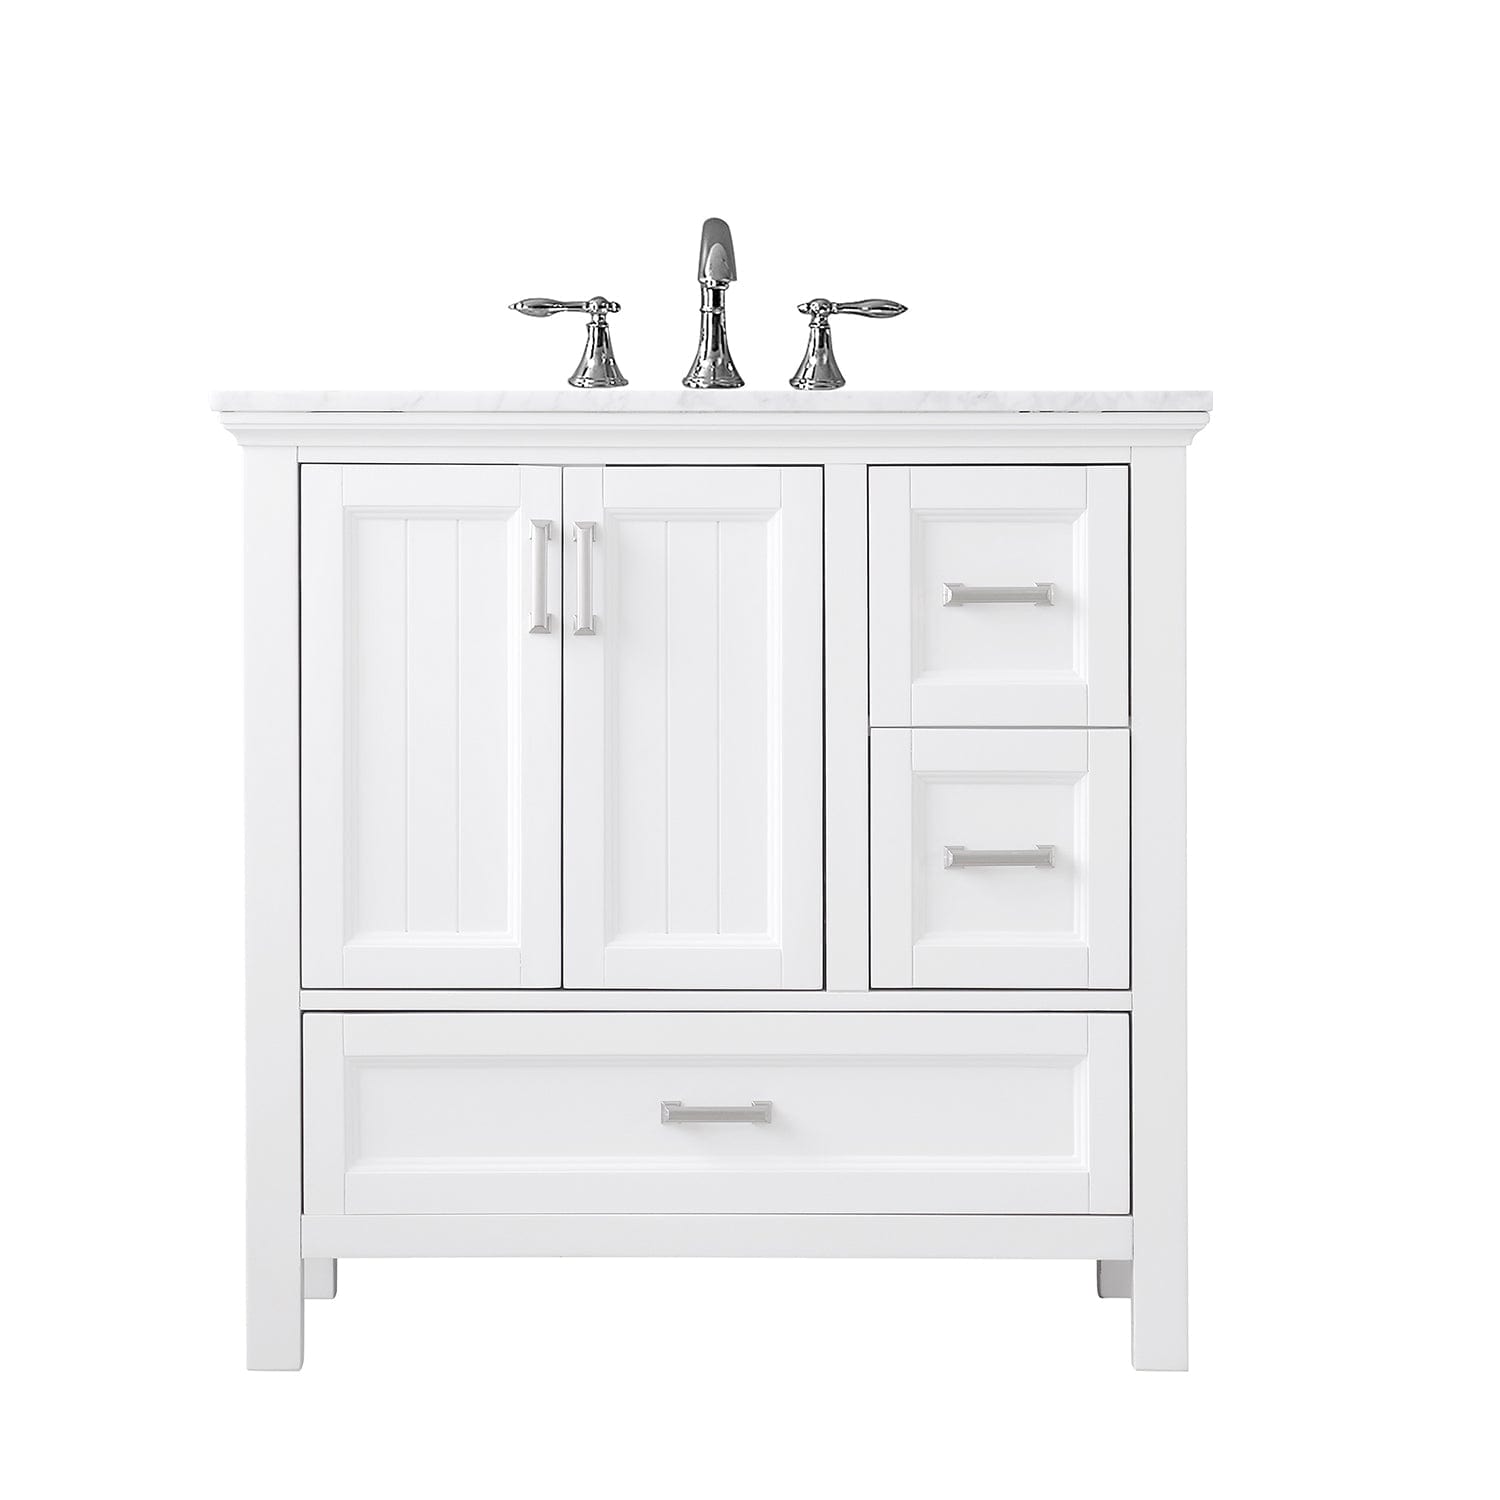 Altair Isla 36" Single Bathroom Vanity Set in White and Carrara White Marble Countertop without Mirror 538036-WH-CA-NM - Molaix631112970822Vanity538036-WH-CA-NM